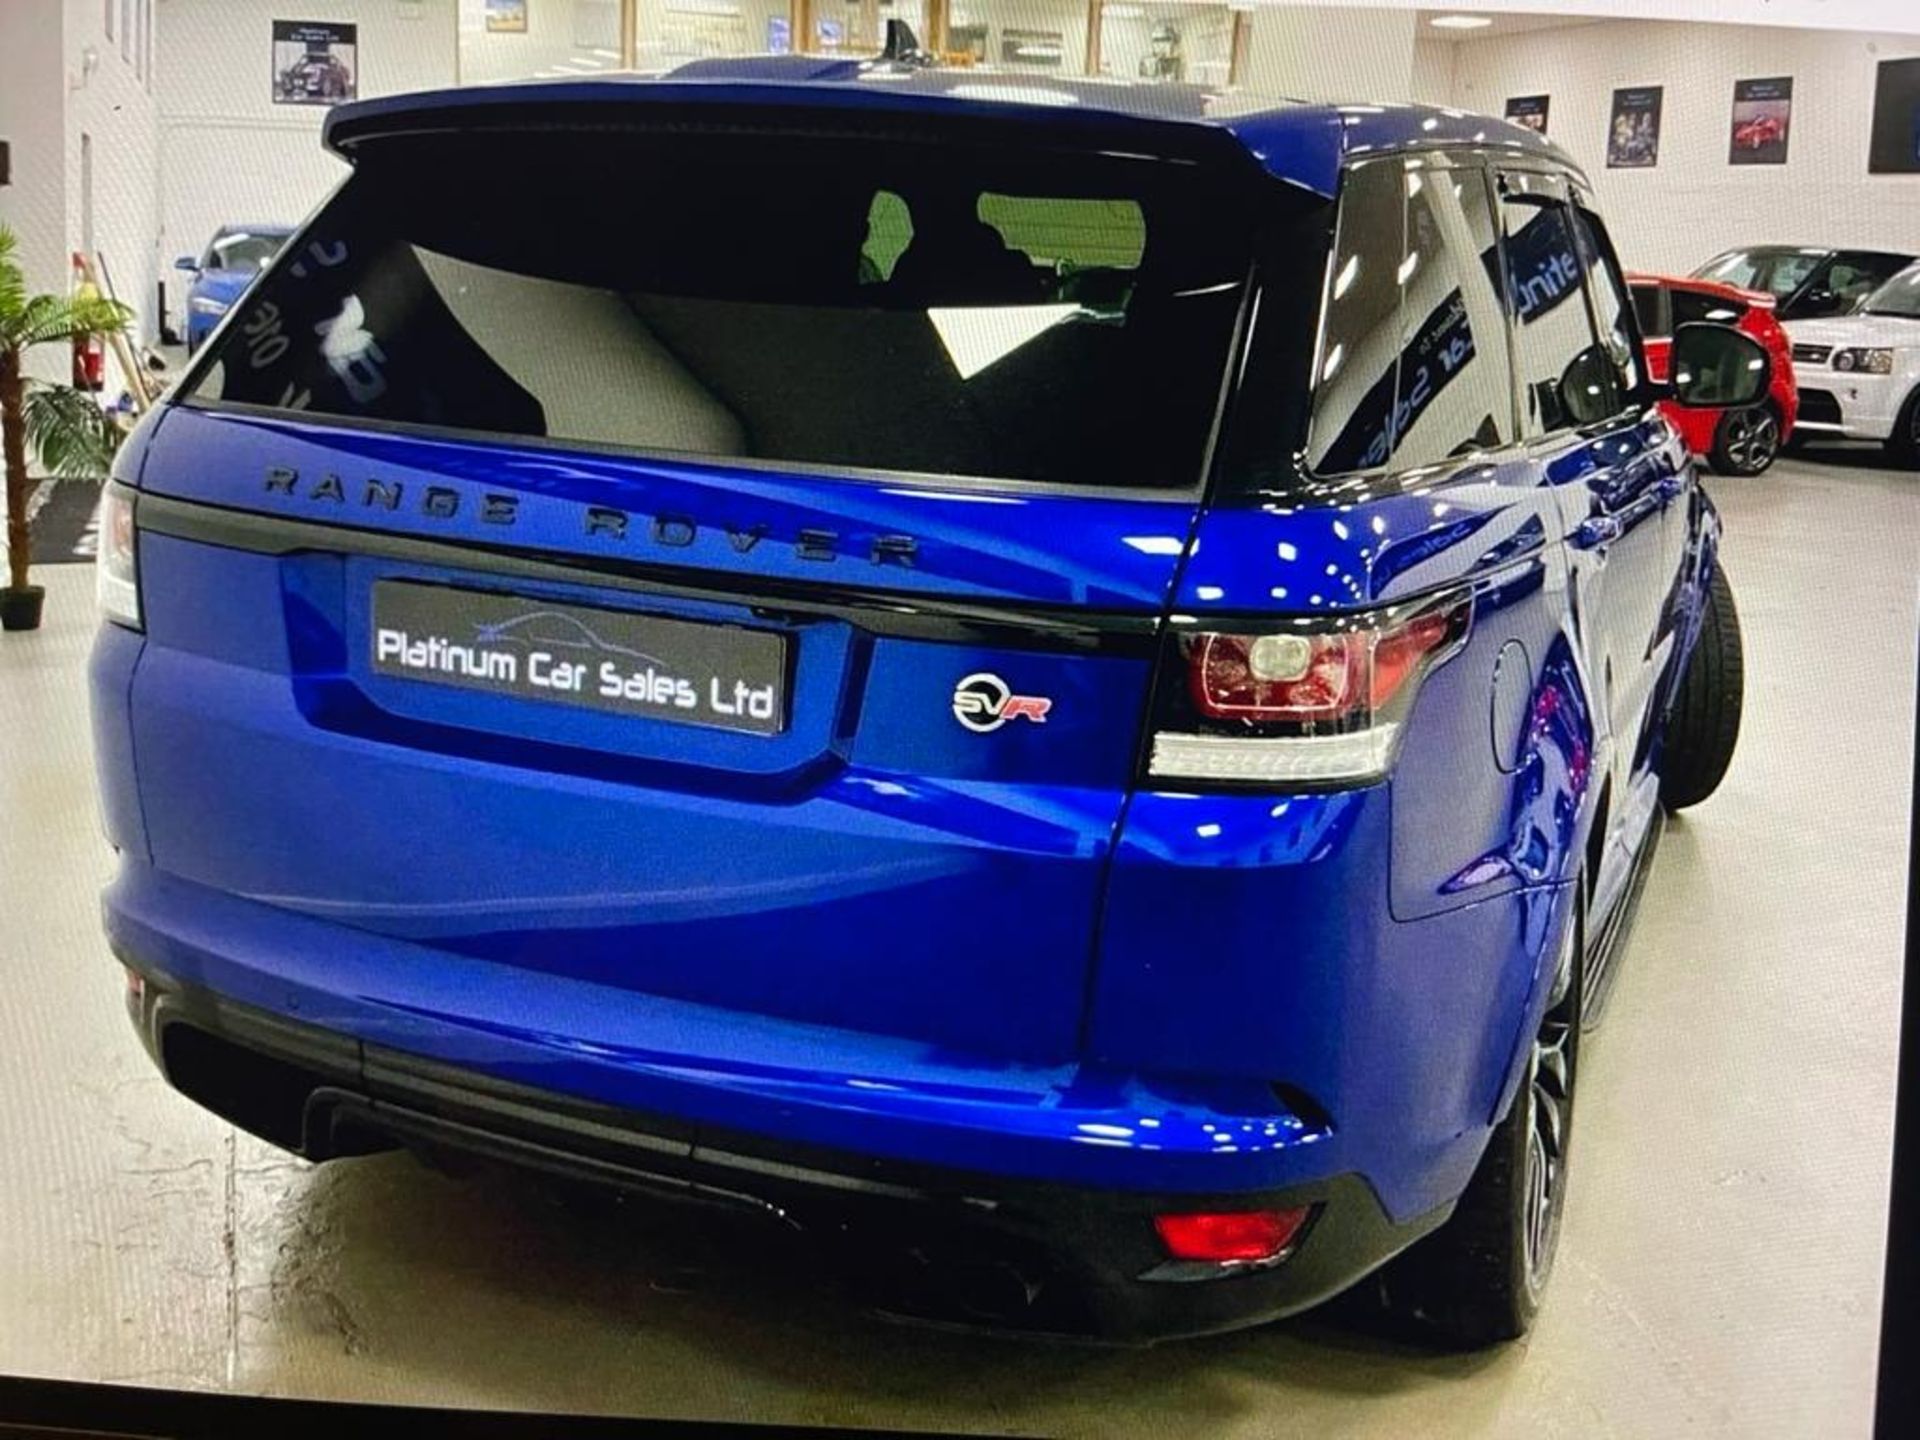 2016 RANGE ROVER SPORT SVR AUTOBIOGRAPHY DYNAMIC V8 SUPERCHARGED AUTOMATIC 5.0 550PS PETROL ENGINE - Image 16 of 28